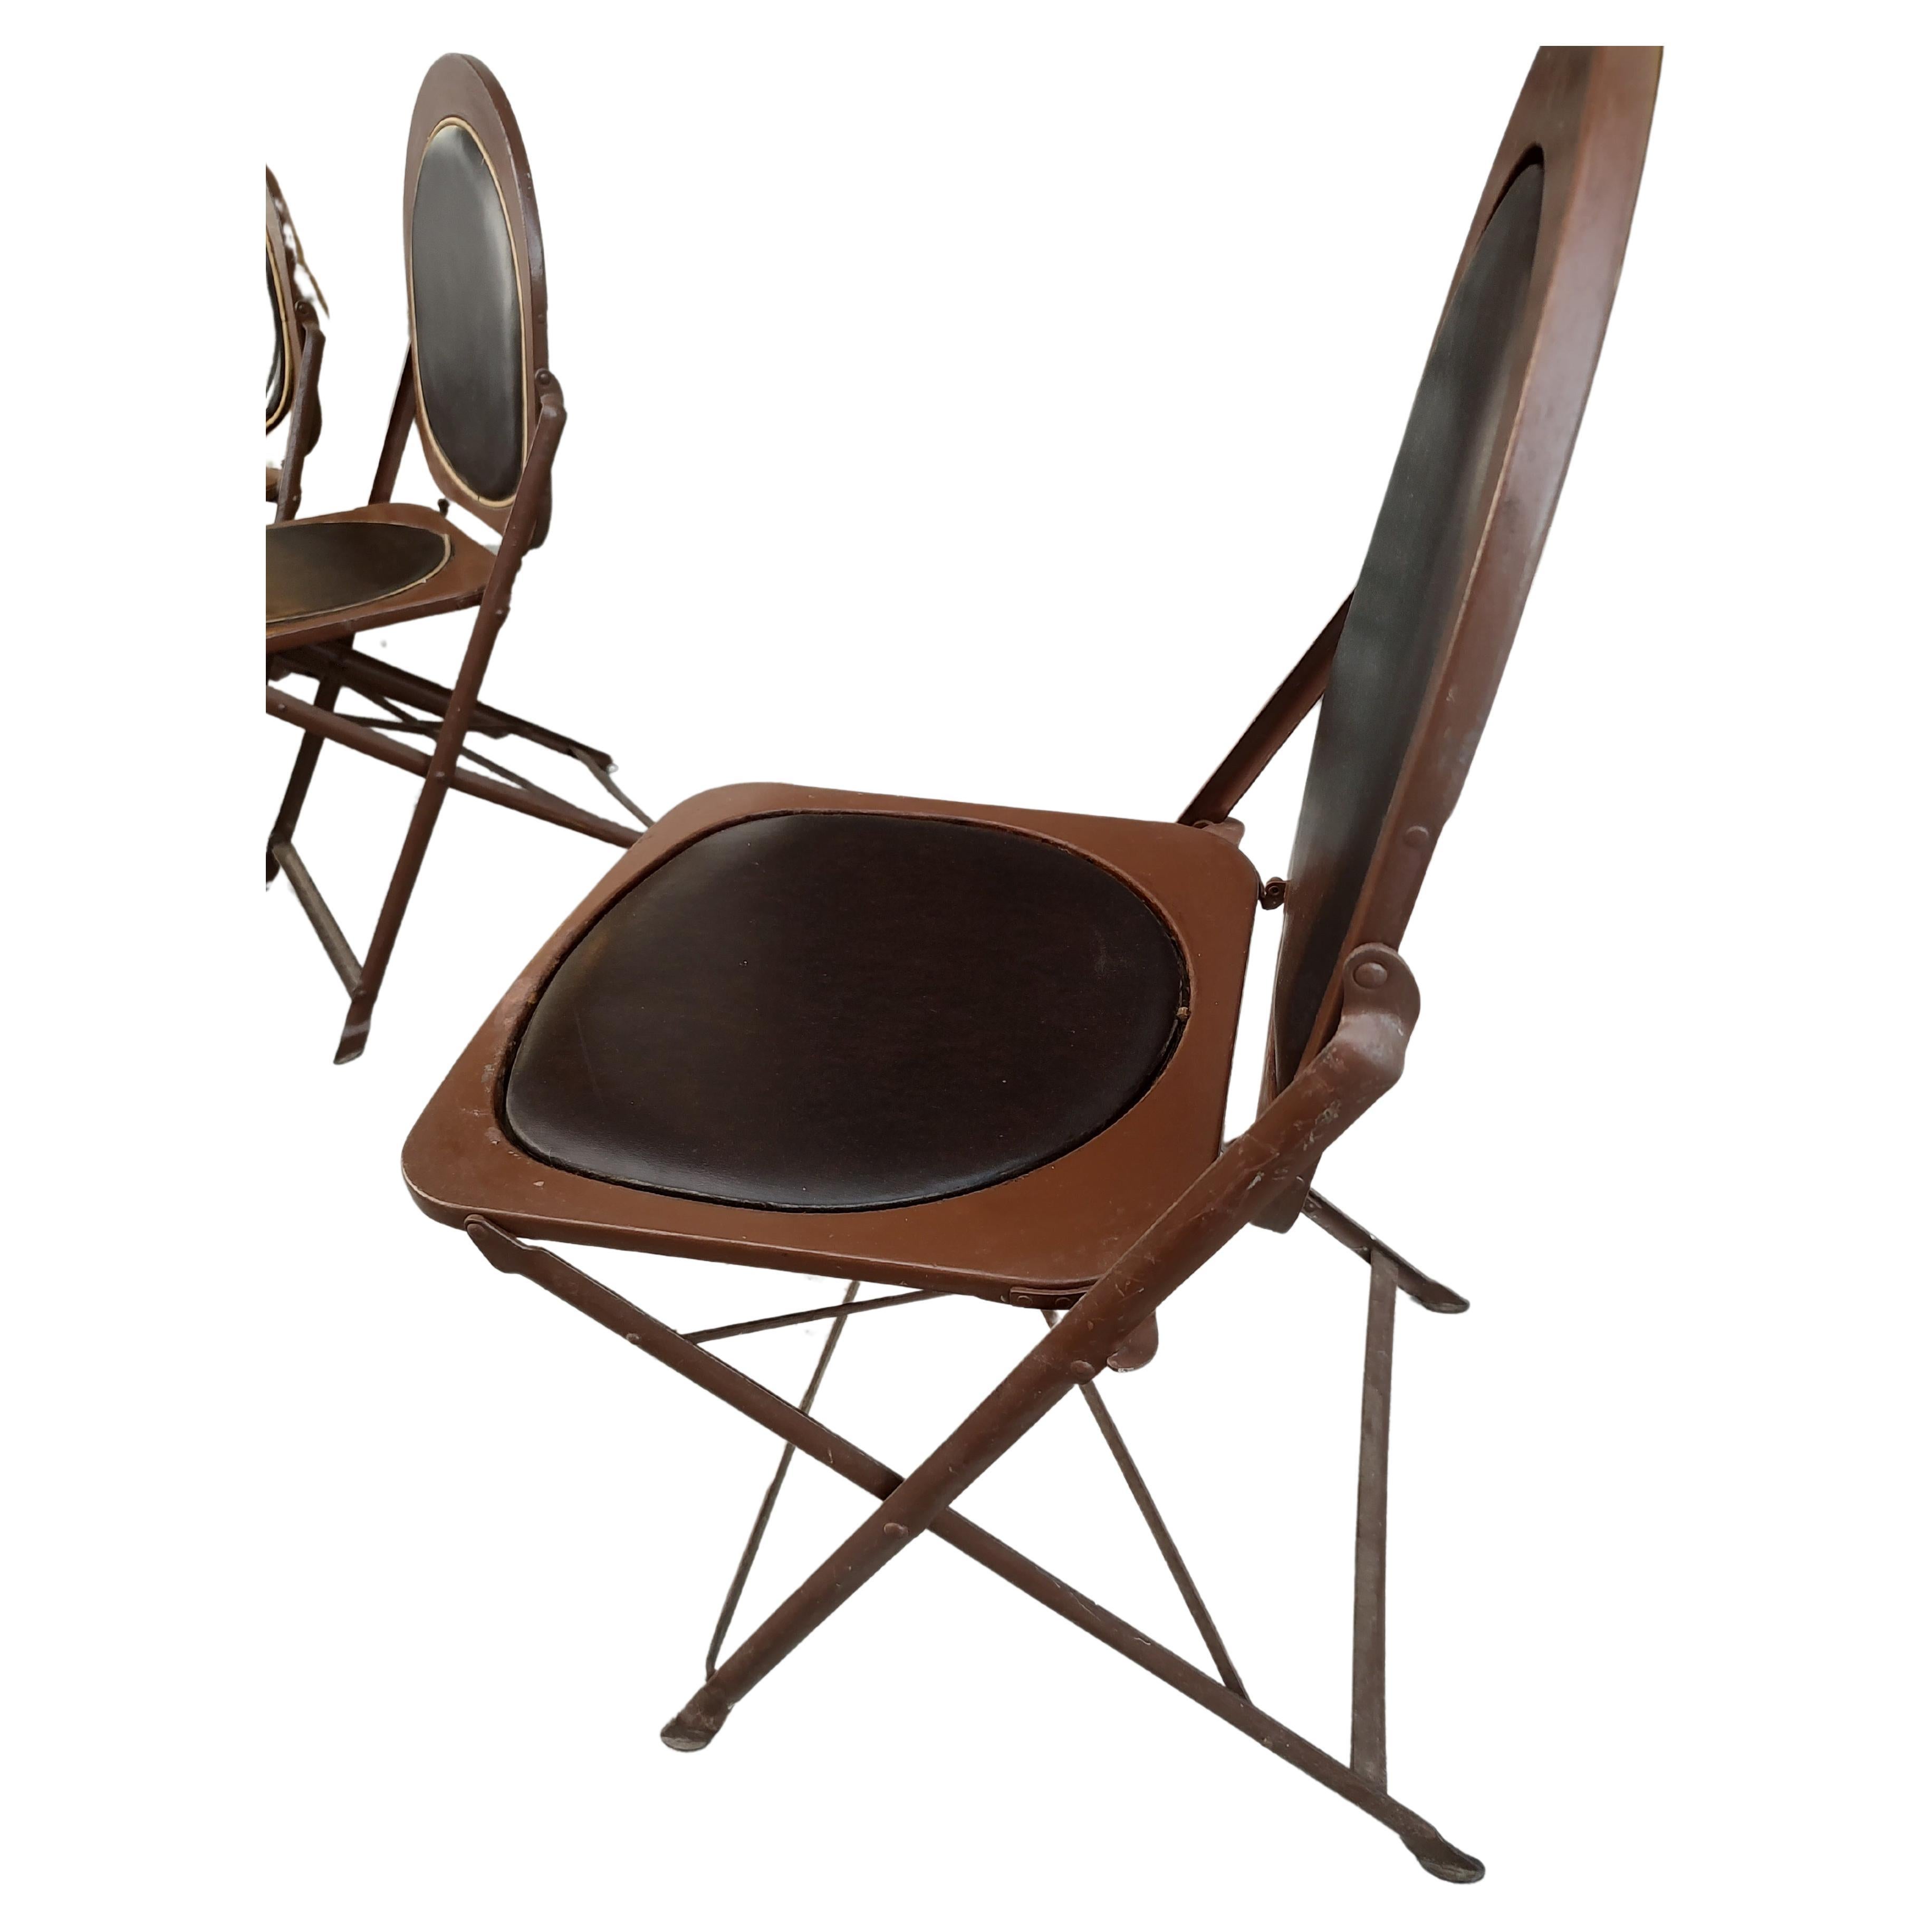 Set of Six Mid-Century Modern Sculptural Unique Folding Chairs In Good Condition For Sale In Port Jervis, NY